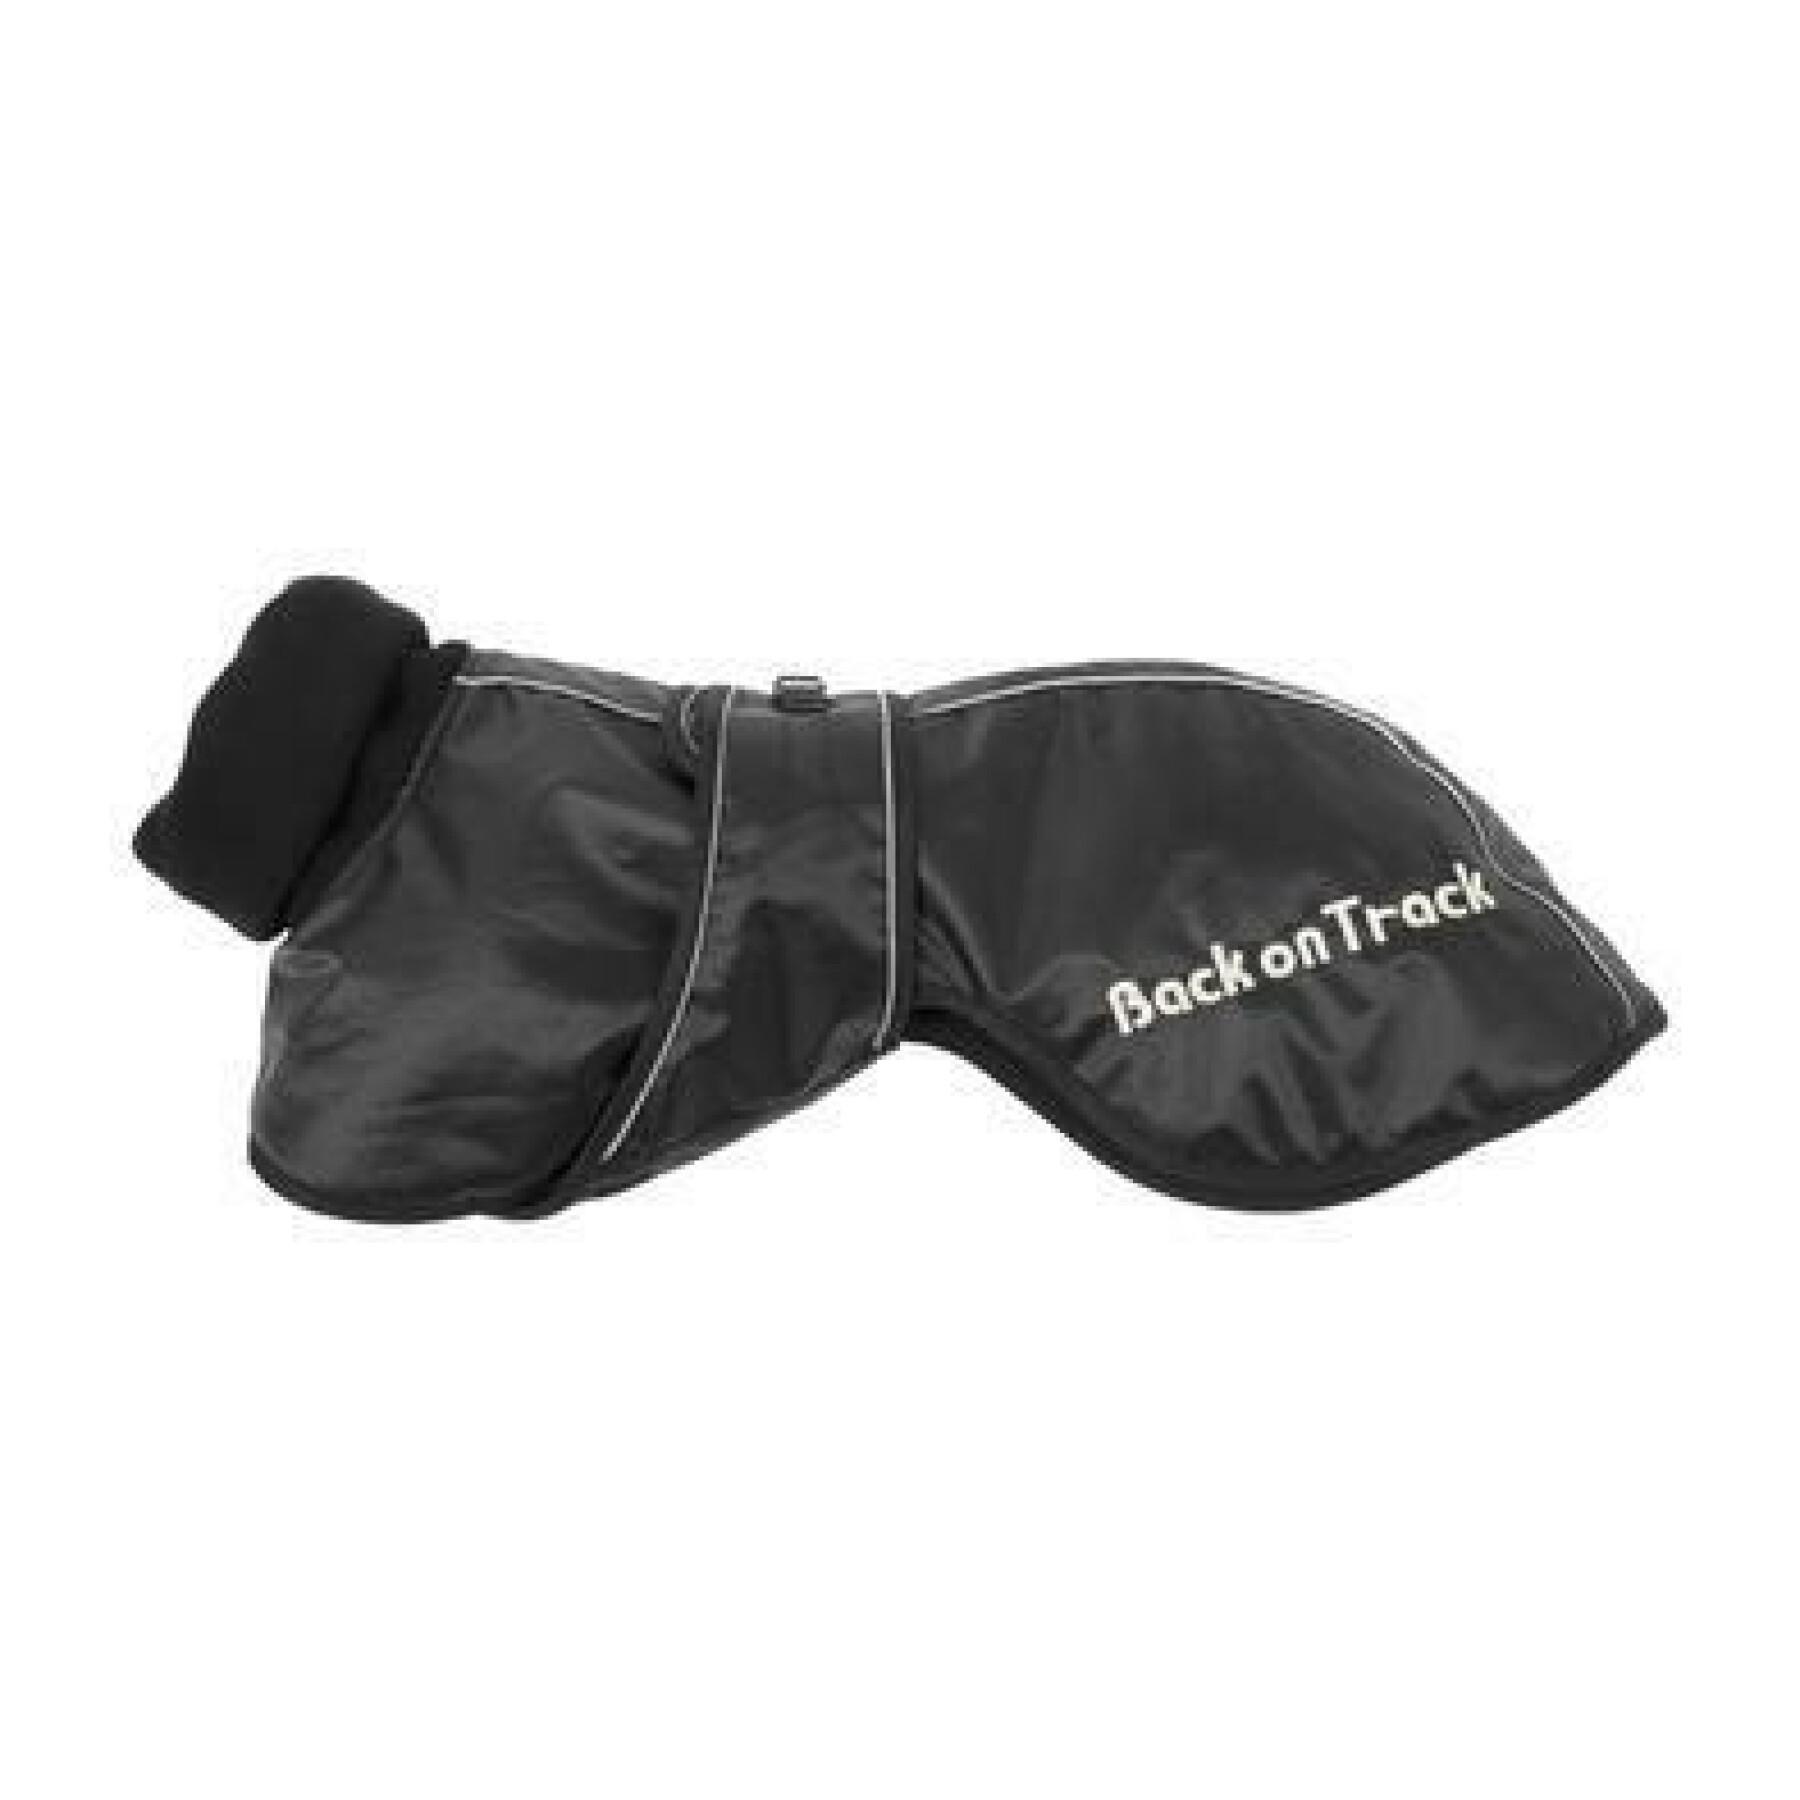 Cappottino per cani Back on Track whippet 35 cm